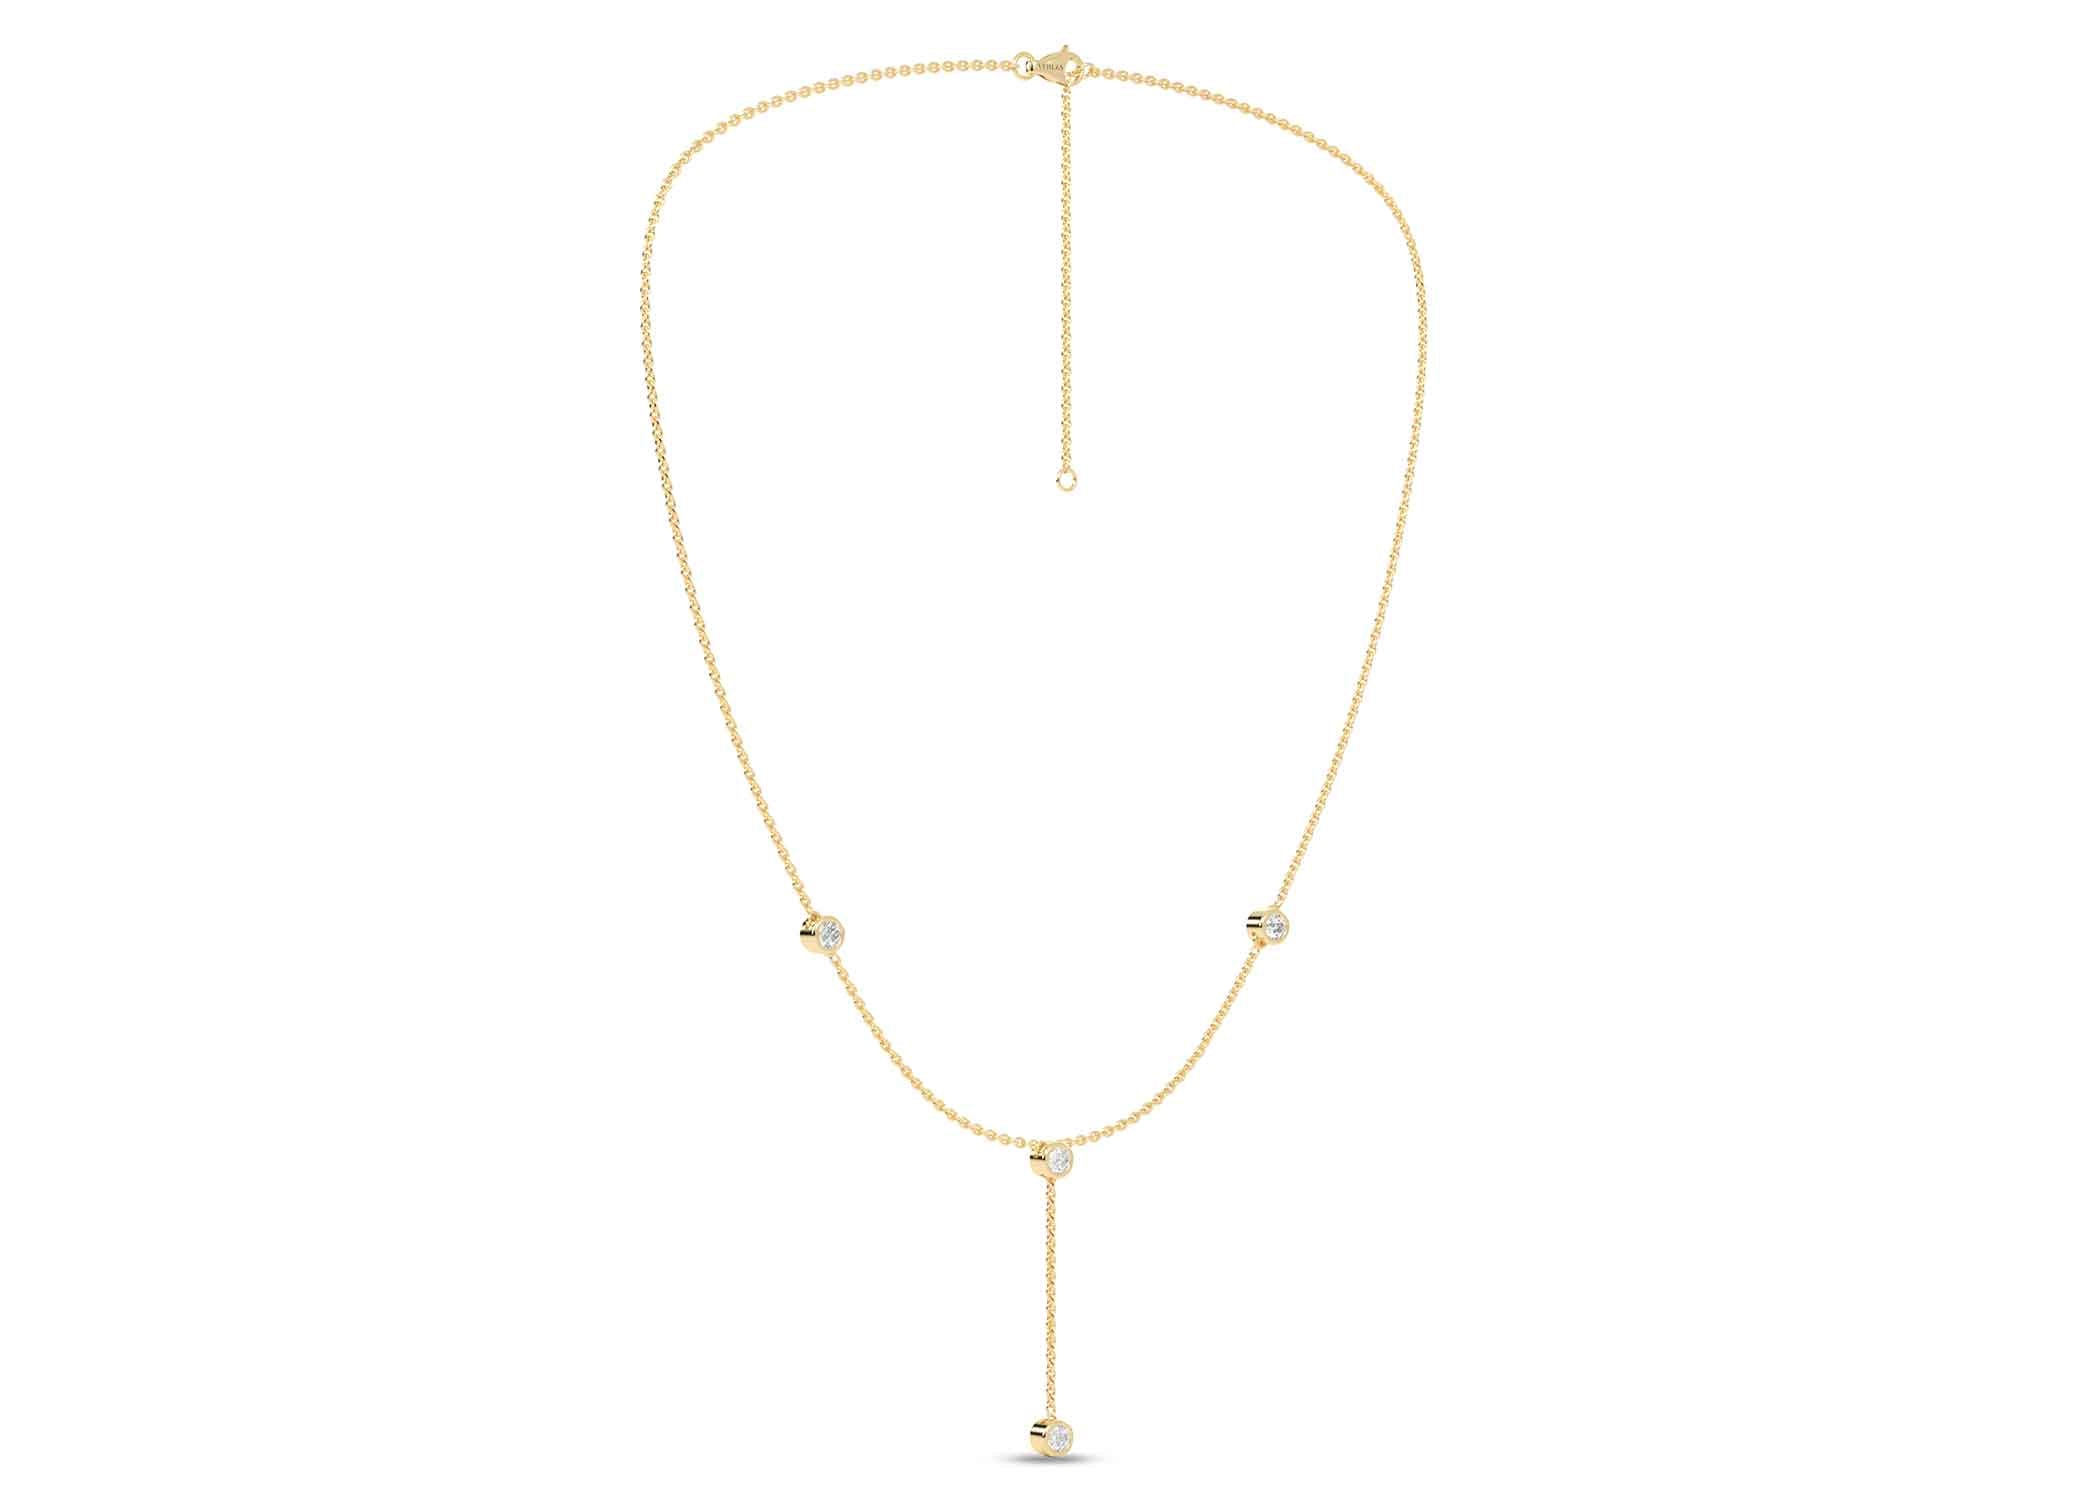 Encompassing Round Stationed Y Necklace - Necklace 